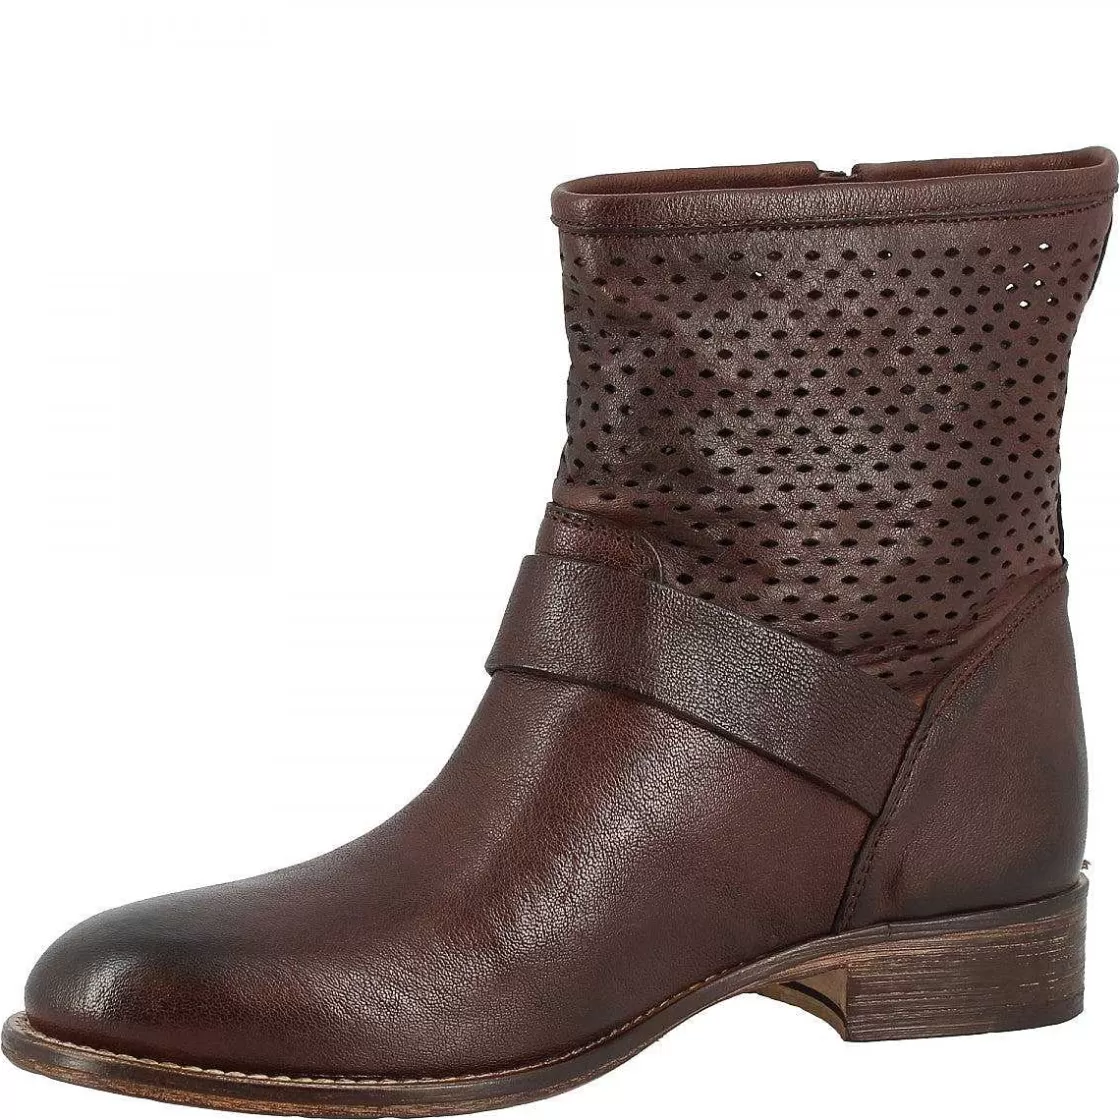 Leonardo Women'S Handmade Ankle Boots In Dark Brown Perforated Calf Leather With Buckles Shop